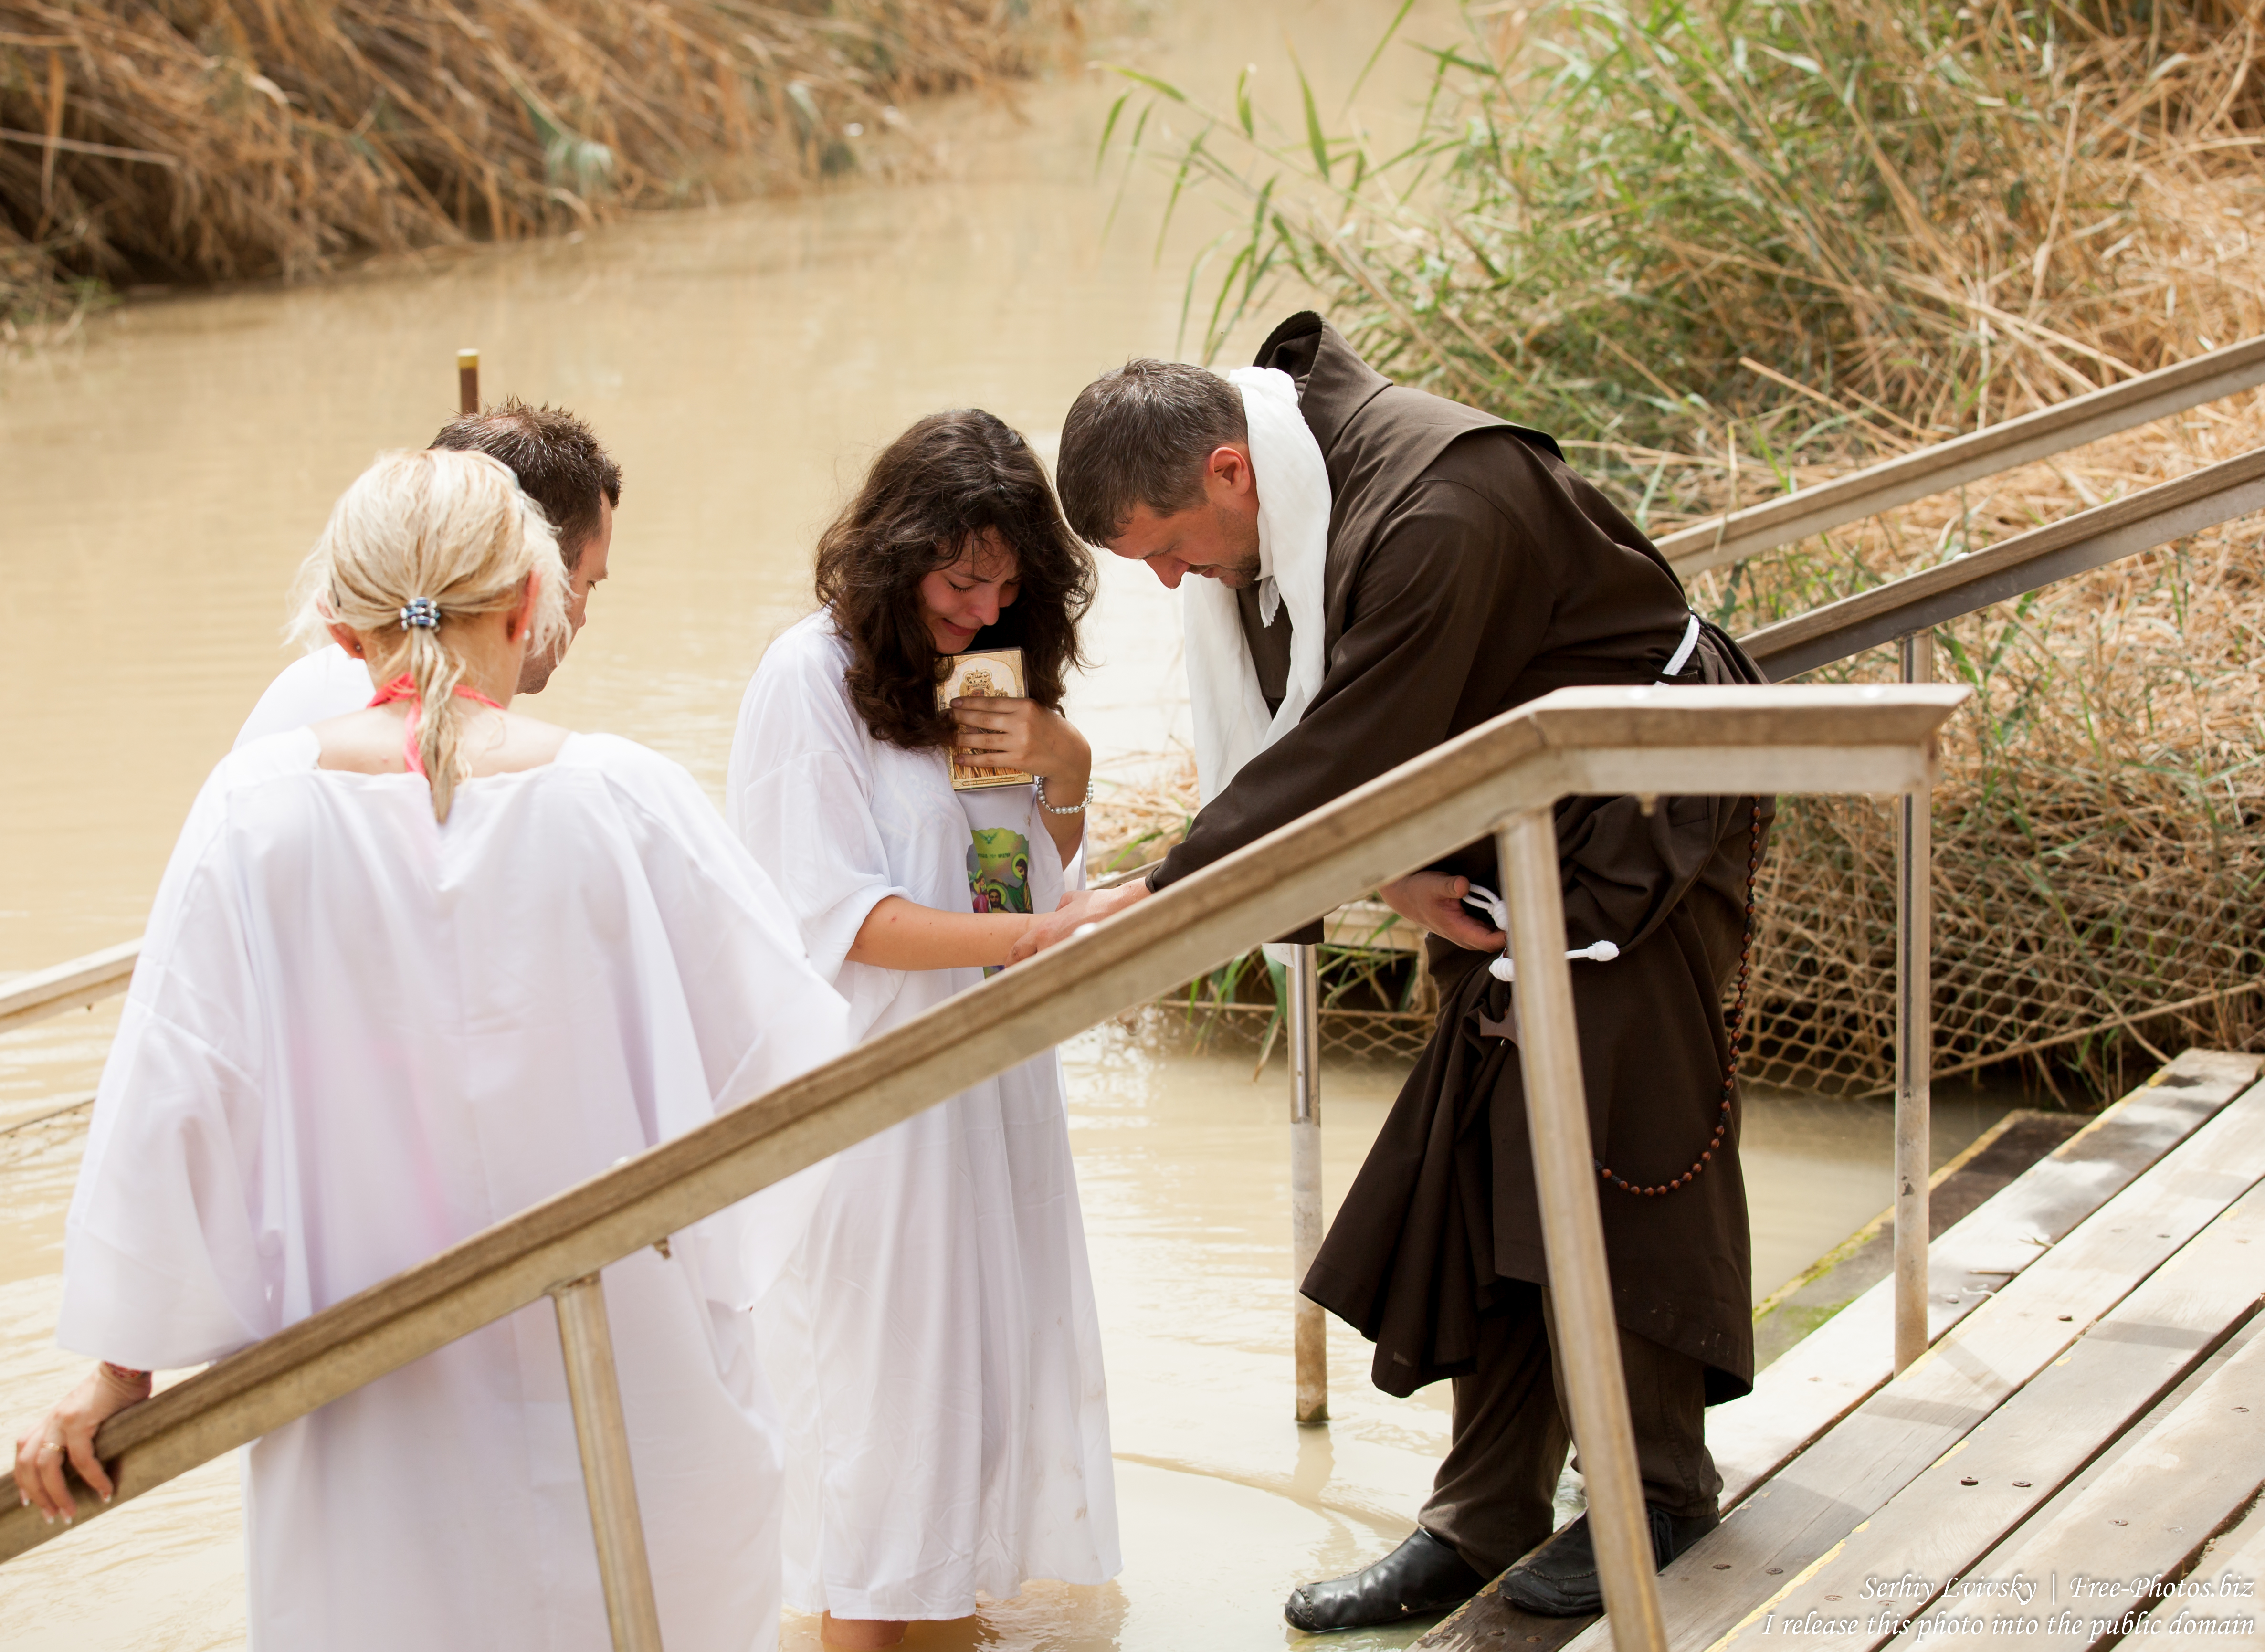 a beautiful 28-year-old pilgrim girl and other people photographed near the Jordan river in the Holy Land in September 2015, picture 4